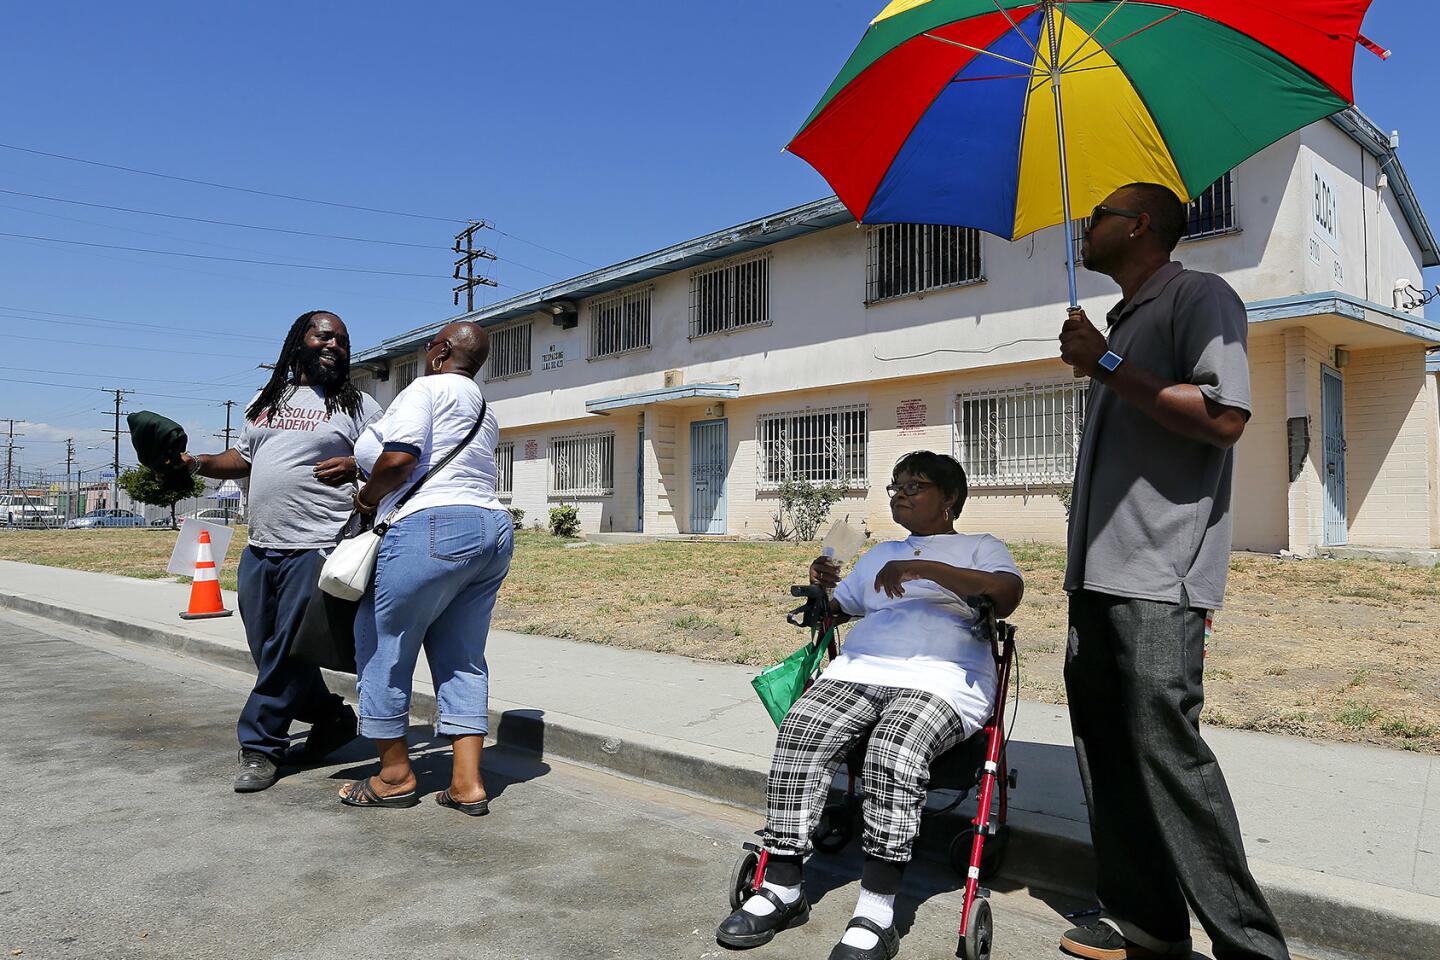 Neighborhood Spotlight: Watts awaits those who are looking for opportunity  - Los Angeles Times